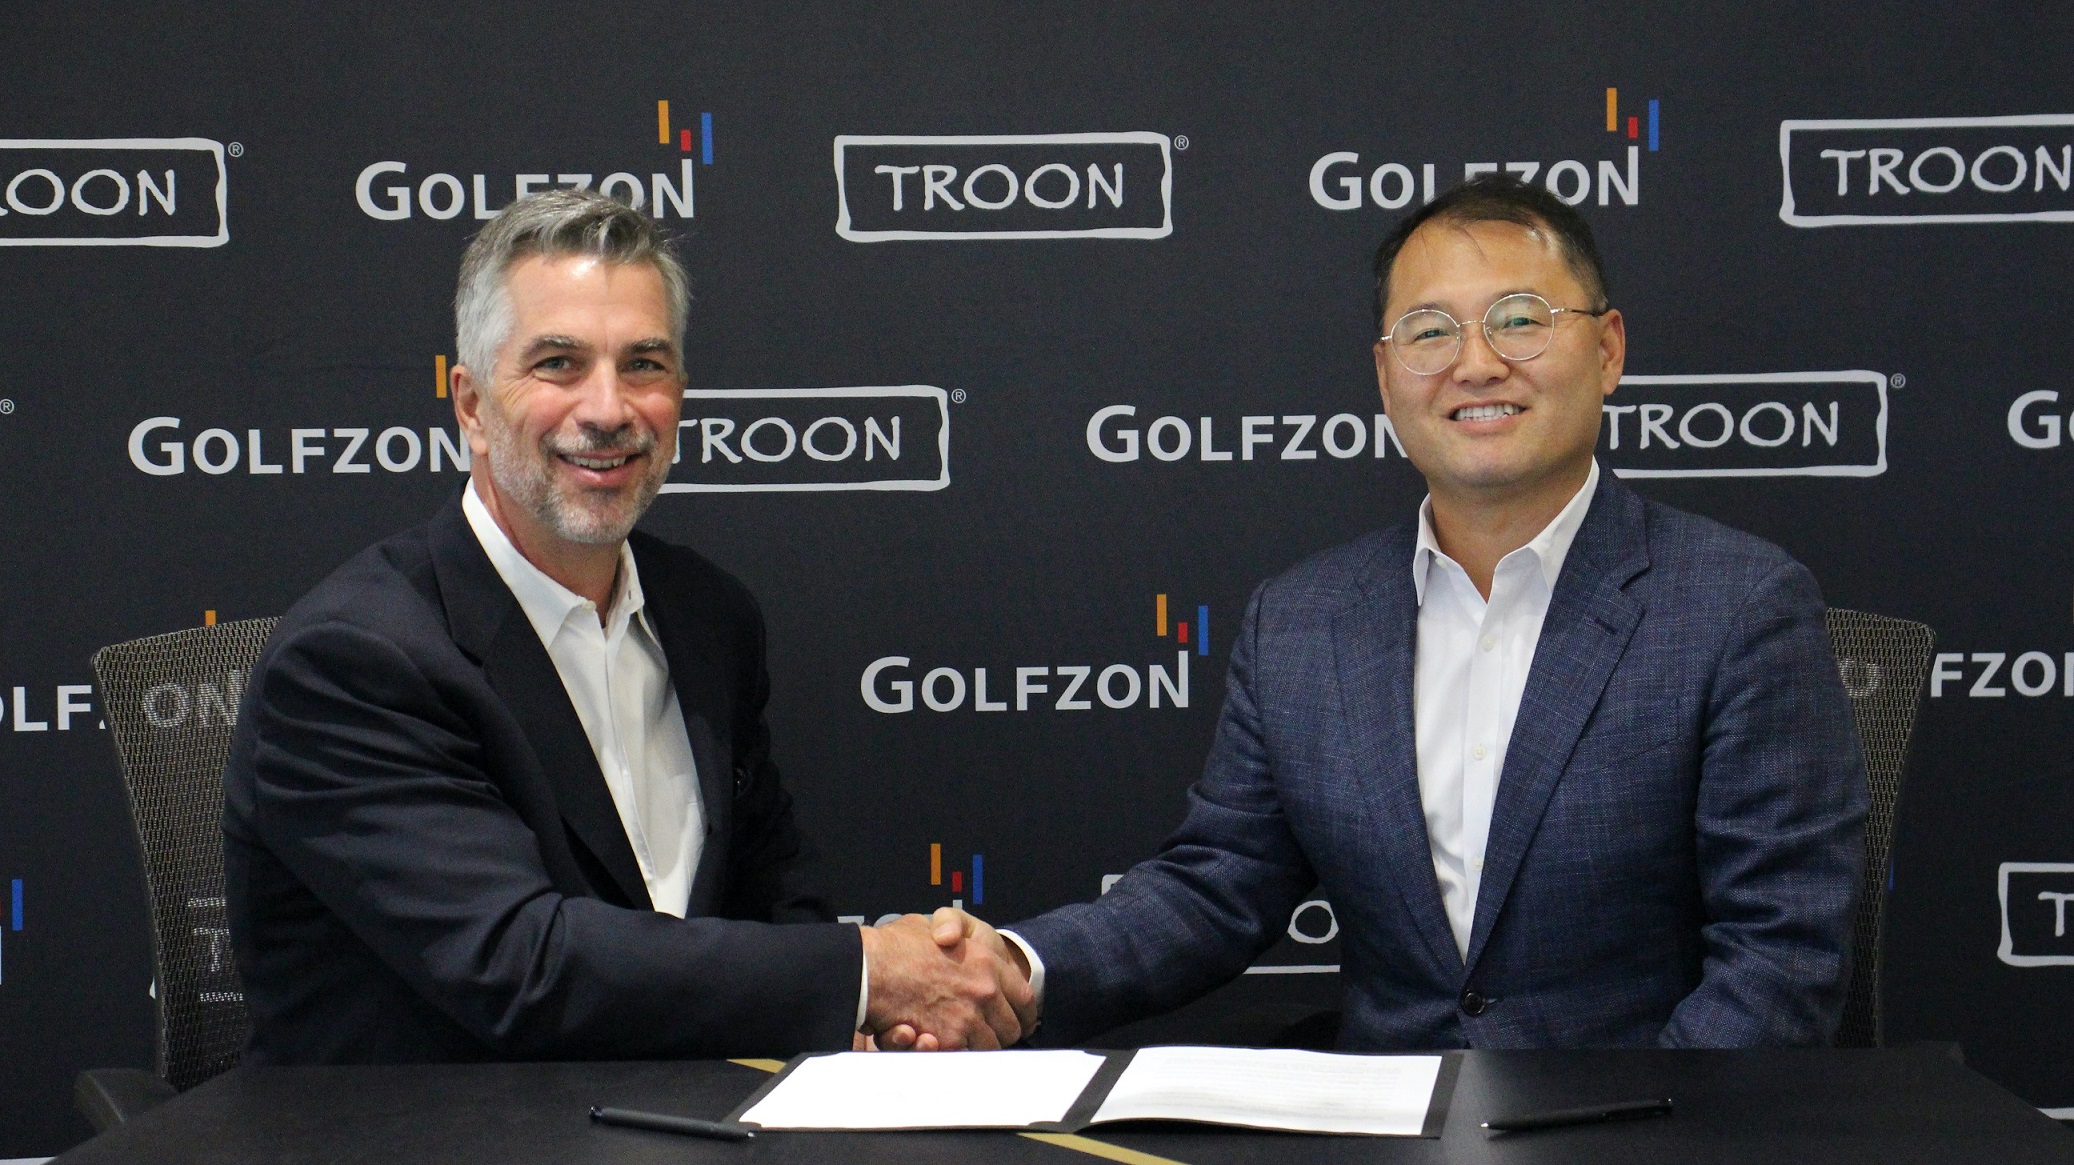 Troon President and CEO Tim Schantz and CEO of Golfzon North America Tommy Lim at partnership agreement.